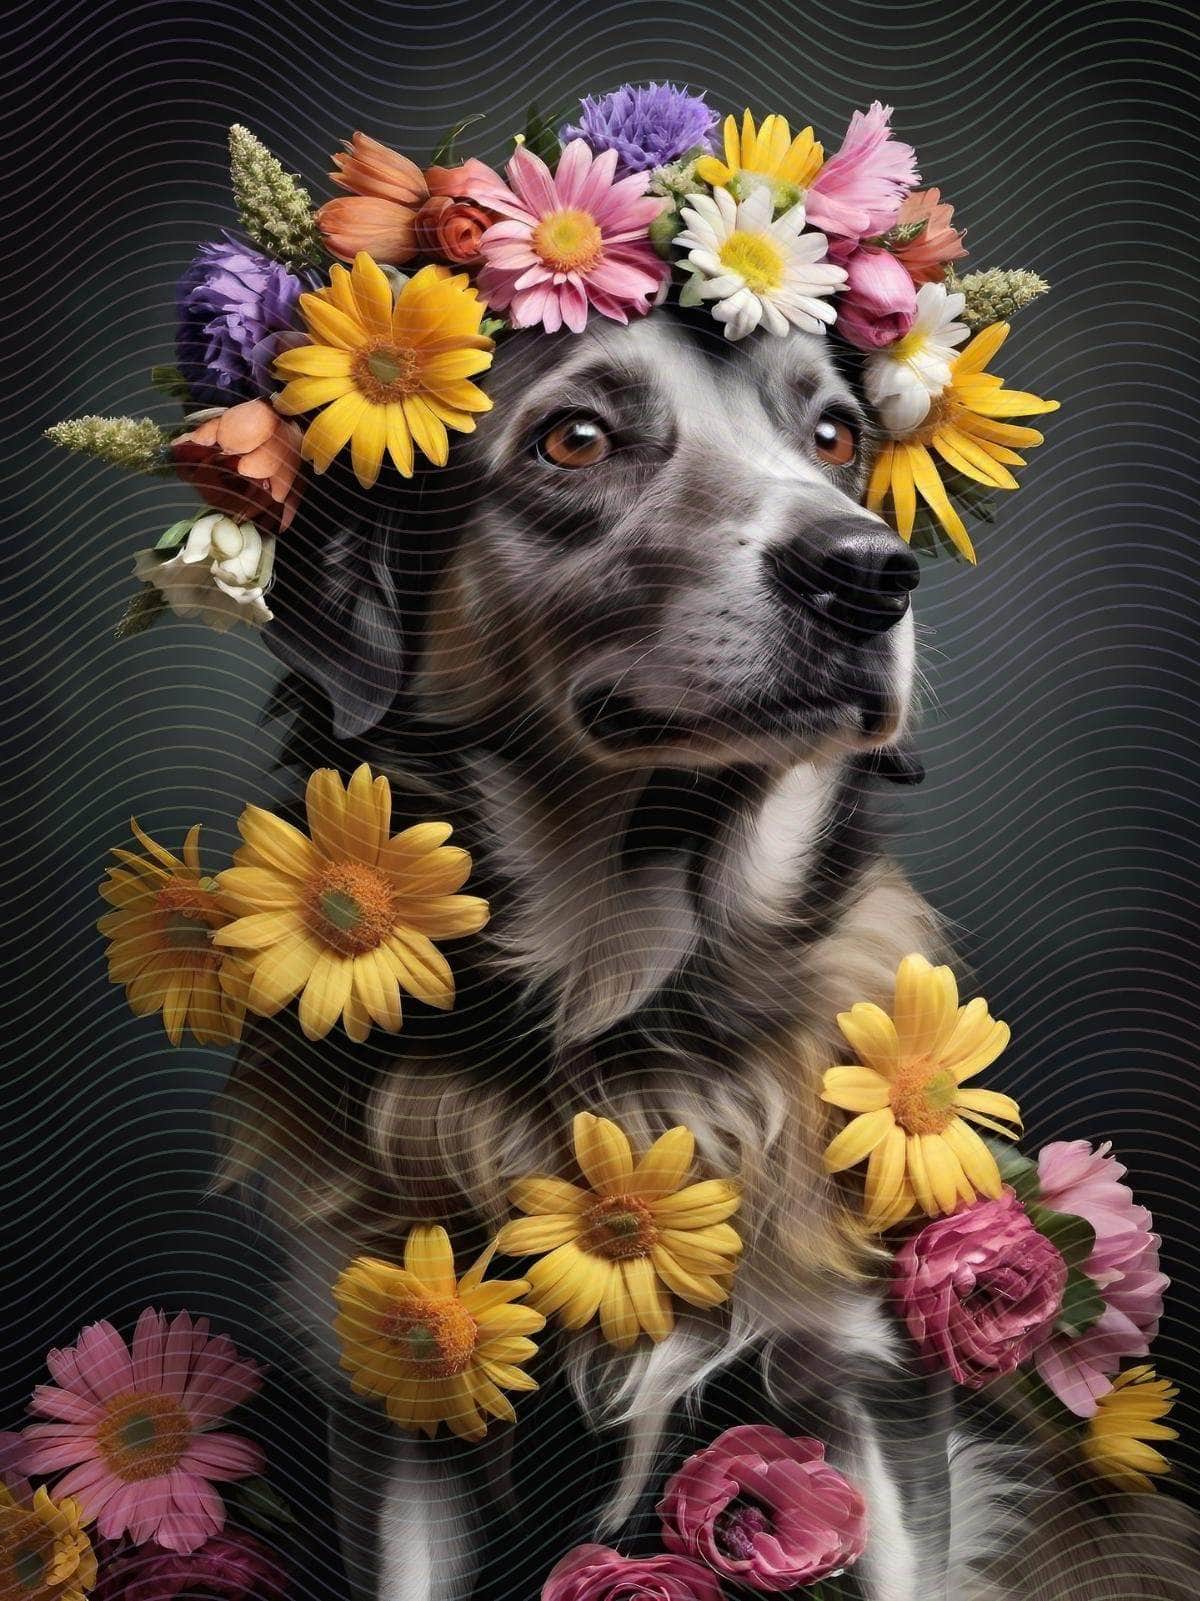 A Dog with a Bunch of Flowers On its Head